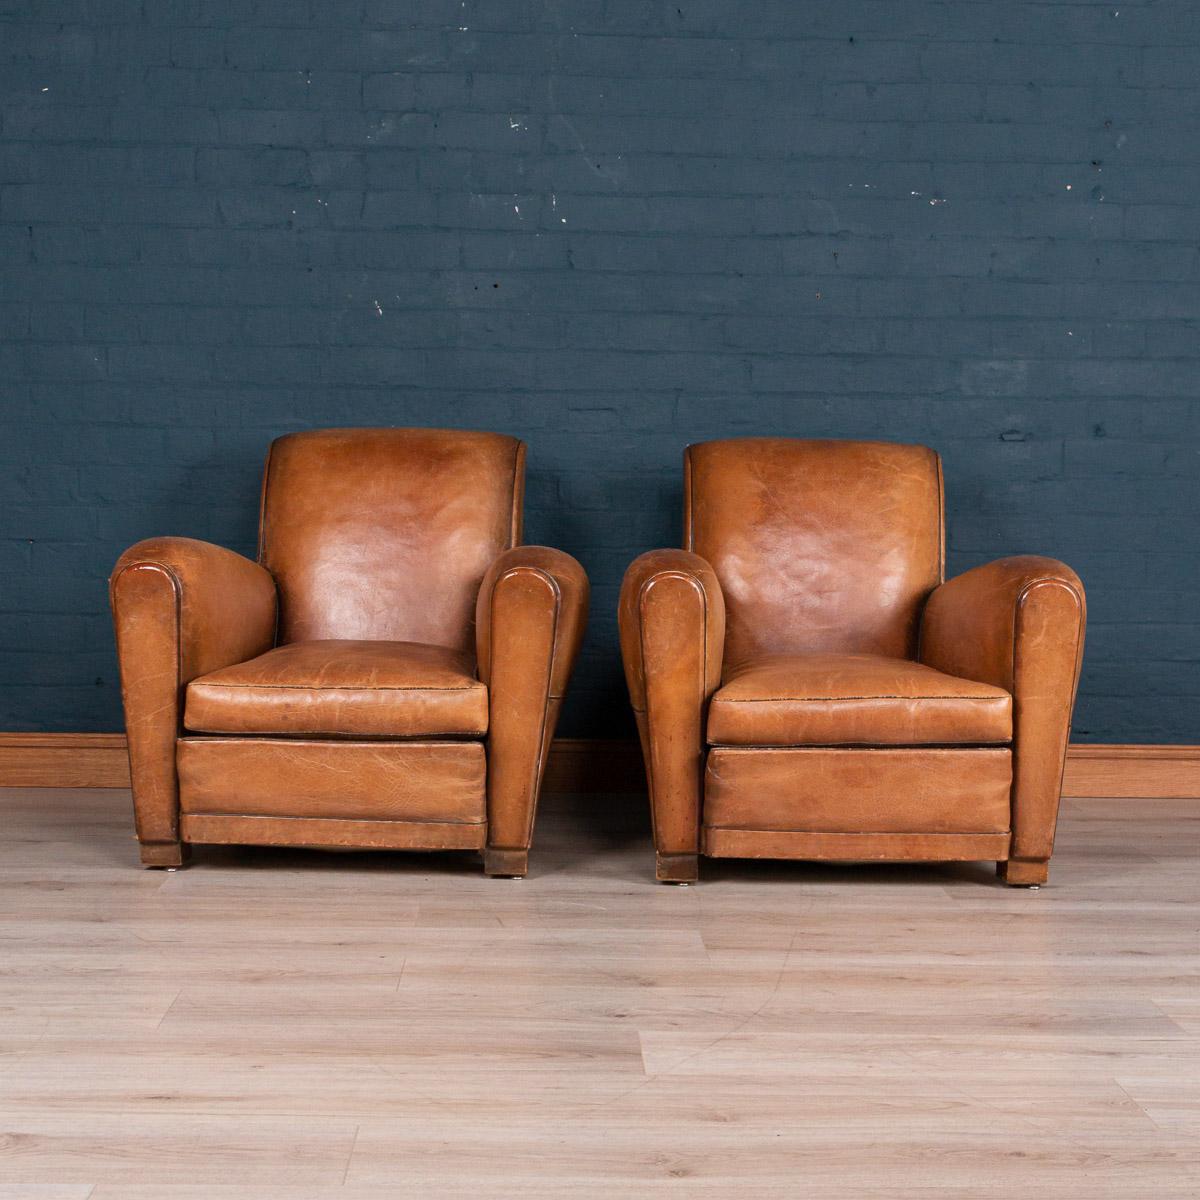 Gorgeous pair of French 20th century leather club chairs, circa 1930. Structurally sound, these chairs have been restored to their former glory and perennially ooze class and sophistication. Extremely comfortable, they suit any style of